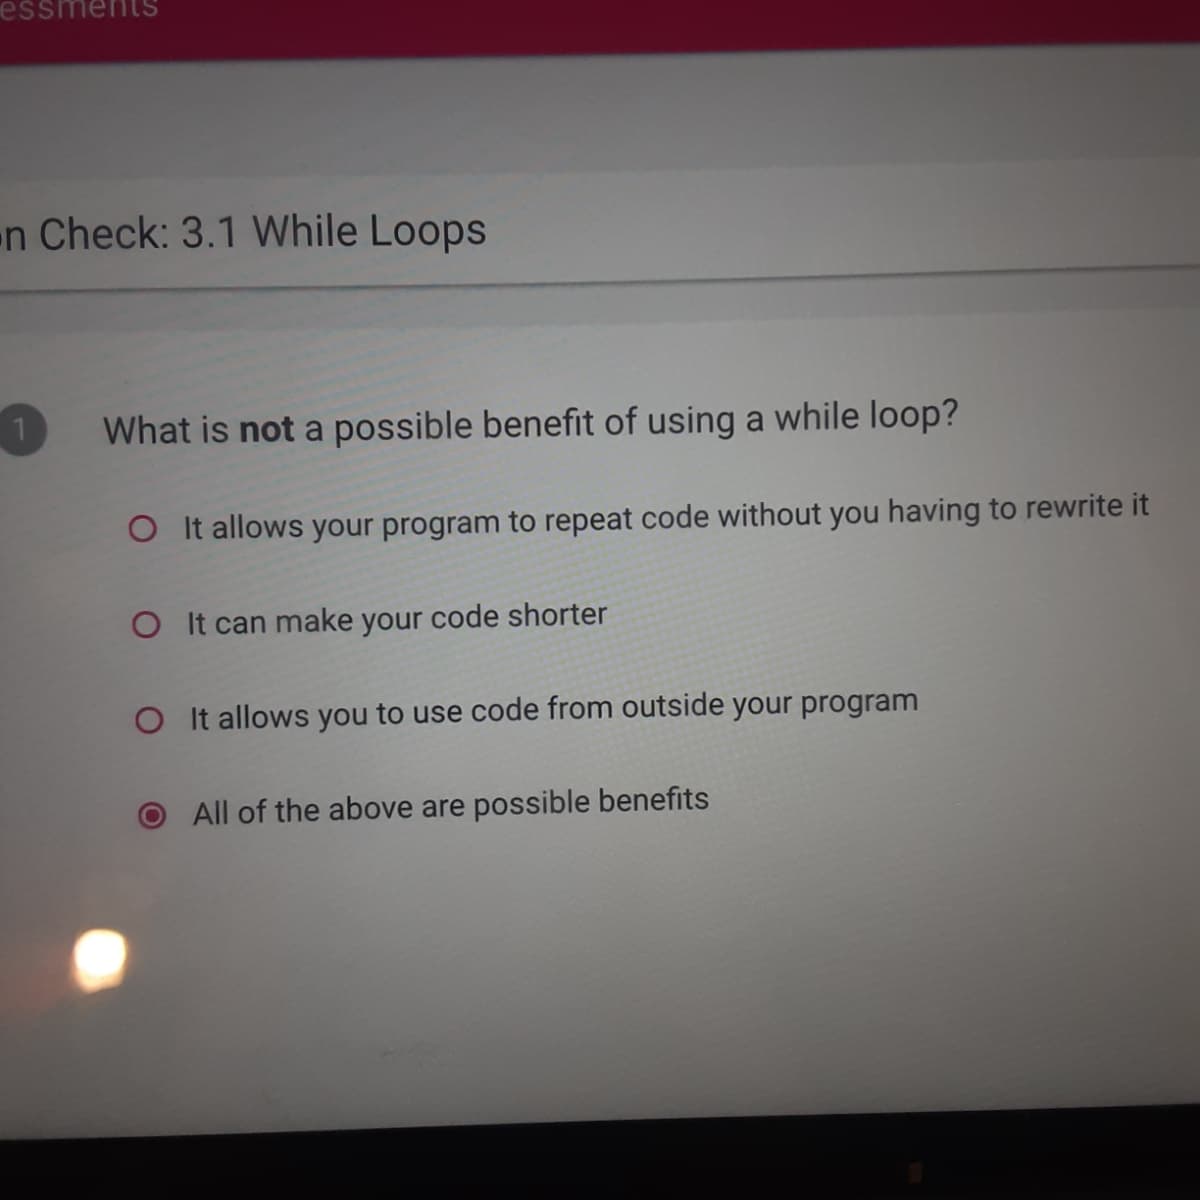 n Check: 3.1 While Loops
What is not a possible benefit of using a while loop?
O It allows your program to repeat code without you having to rewrite it
O It can make your code shorter
O It allows you to use code from outside your program
All of the above are possible benefits
